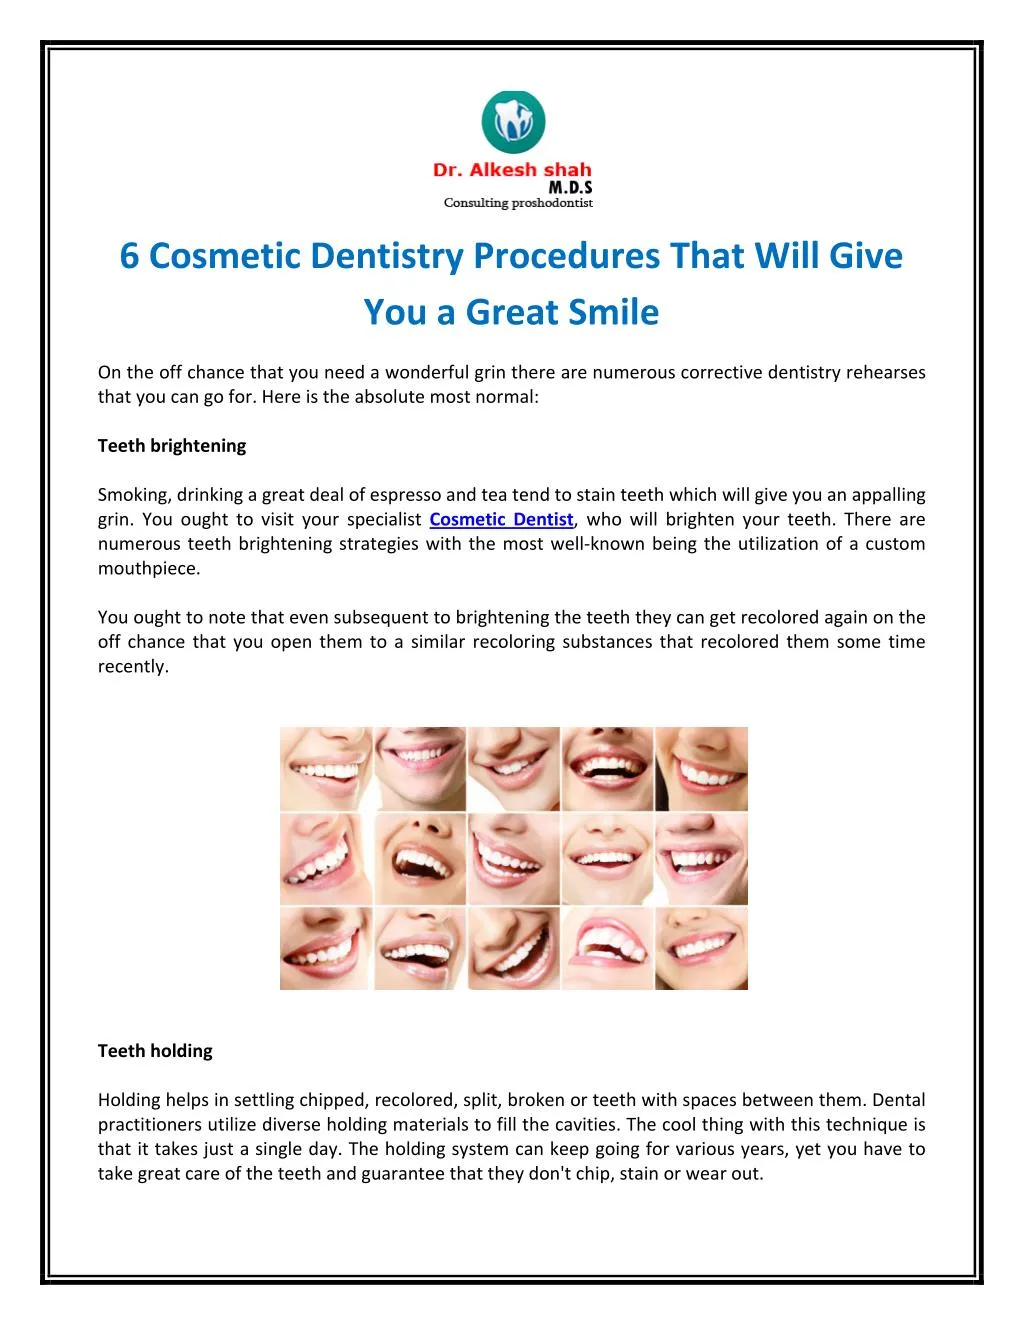 6 cosmetic dentistry procedures that will give